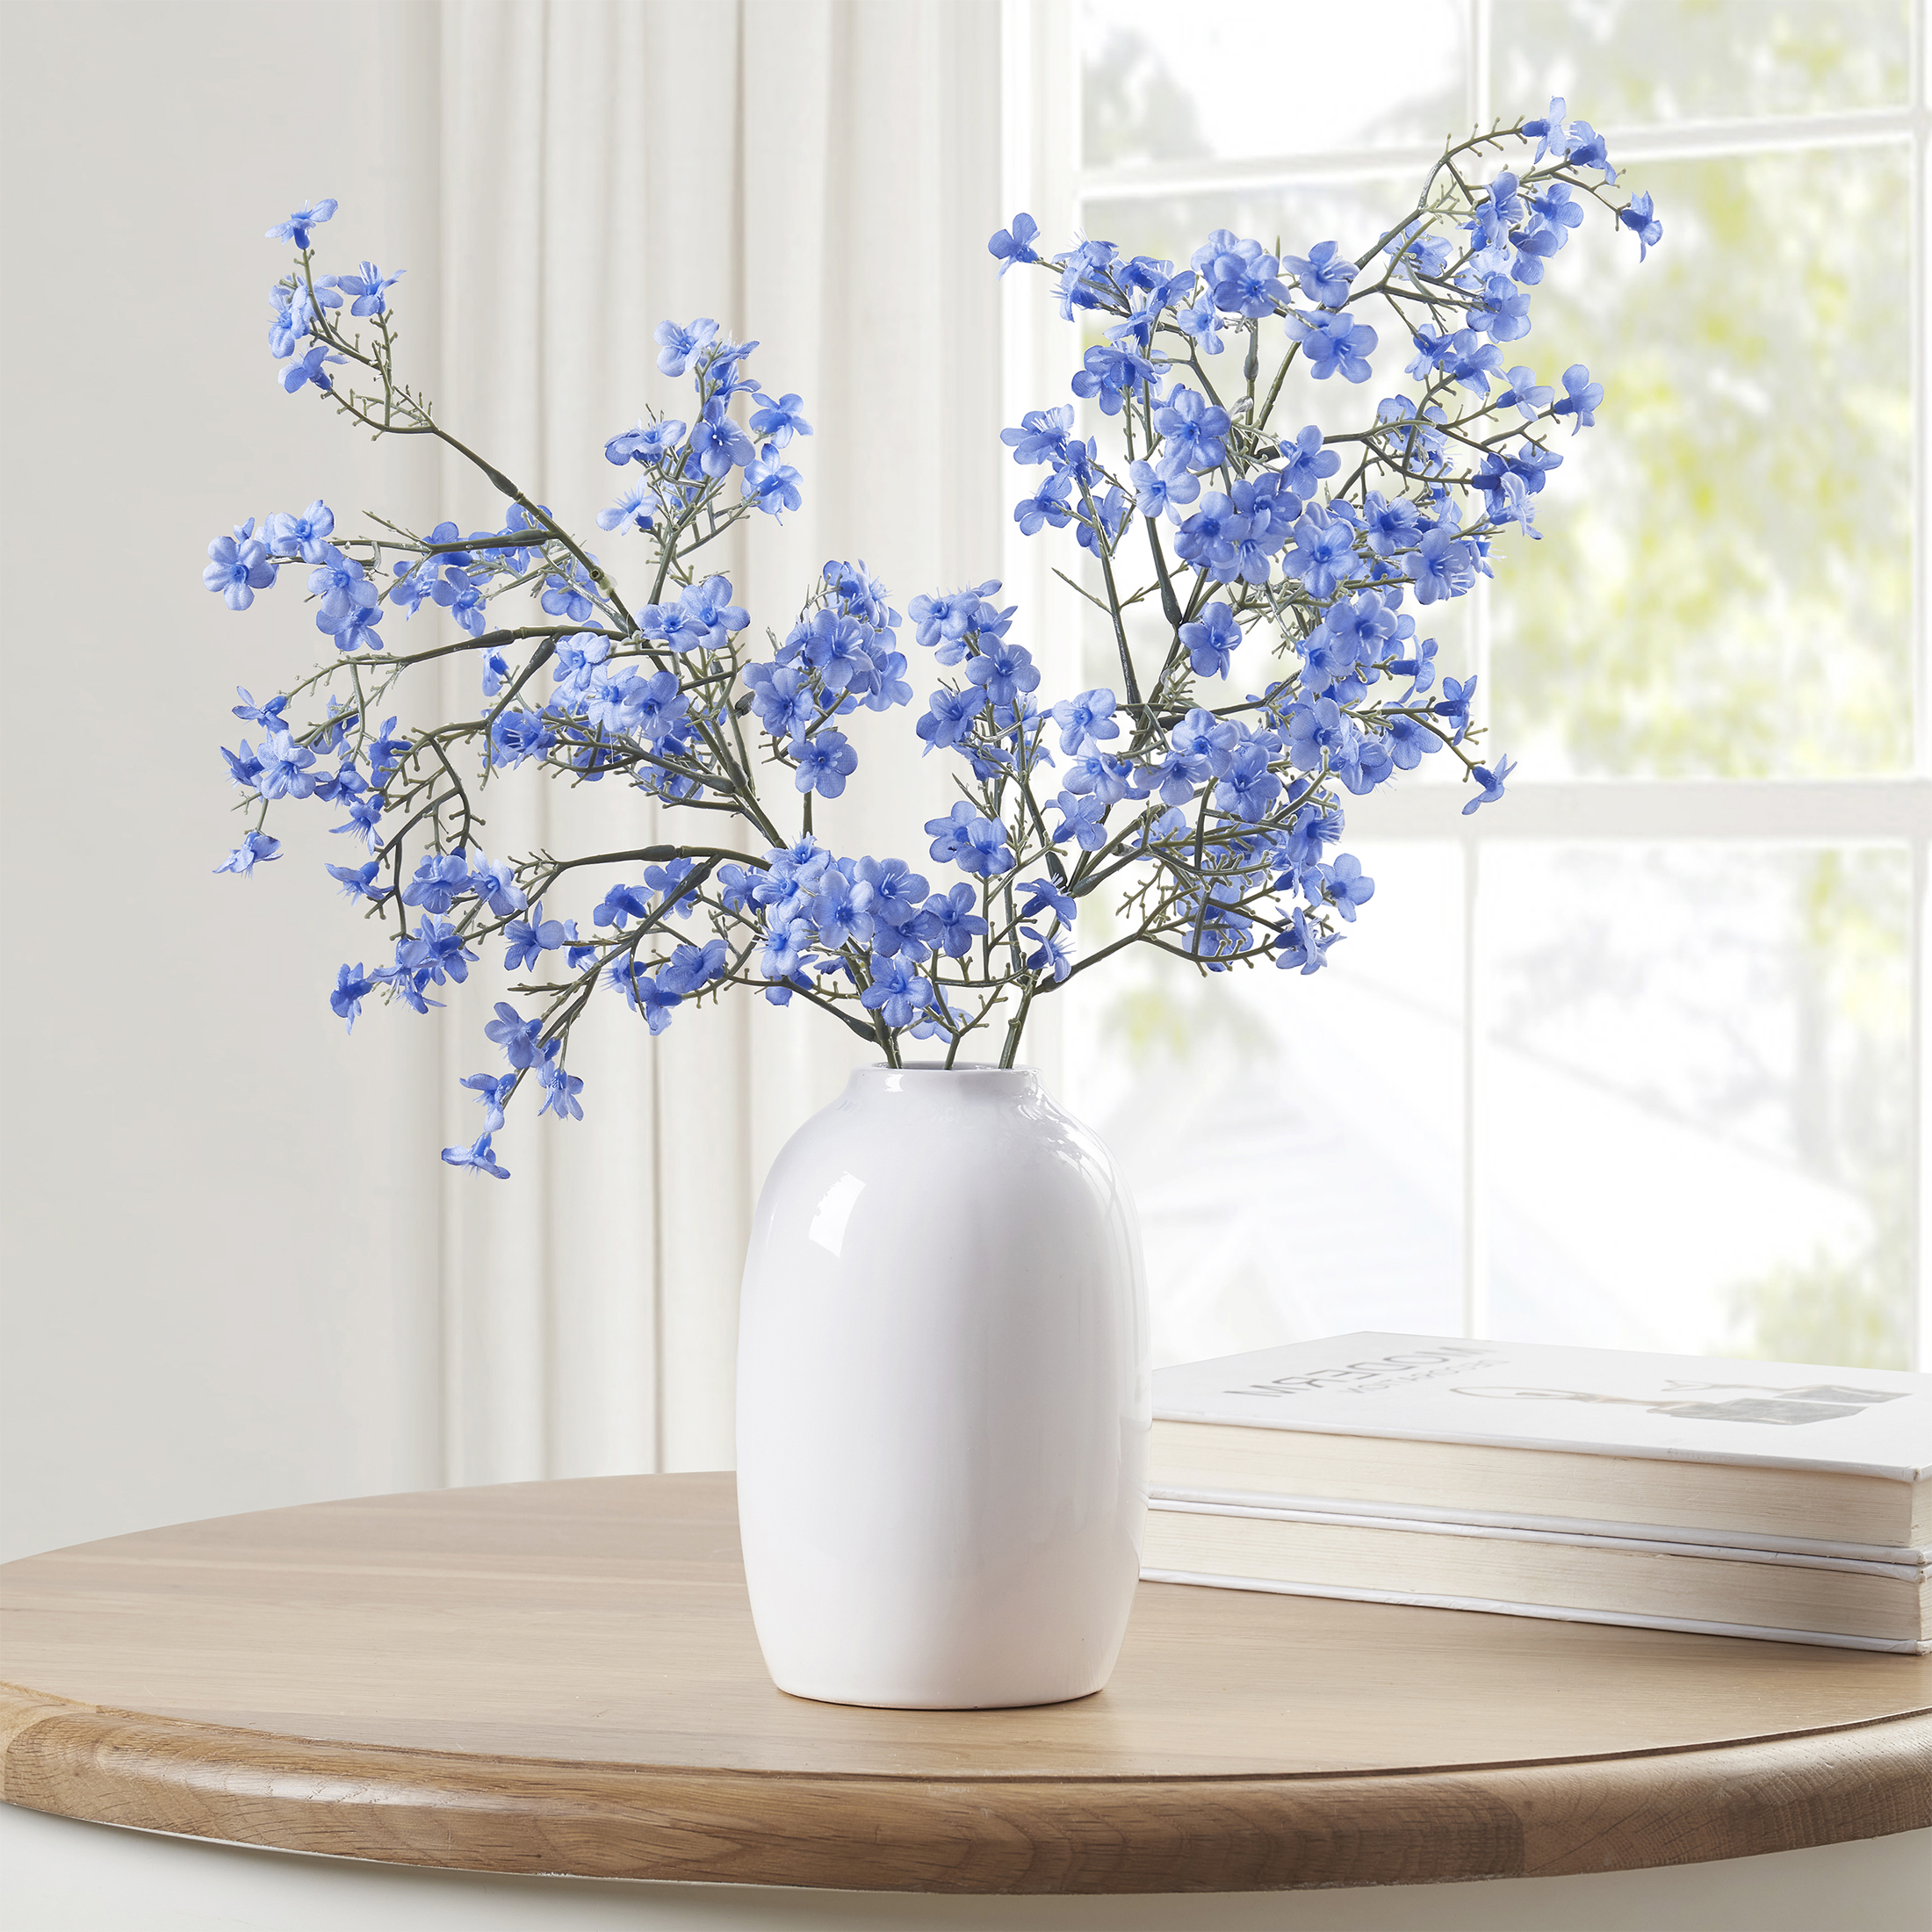 My Texas House Blue Faux Floral Springs in White Ceramic Vase, 16" Height - image 2 of 7